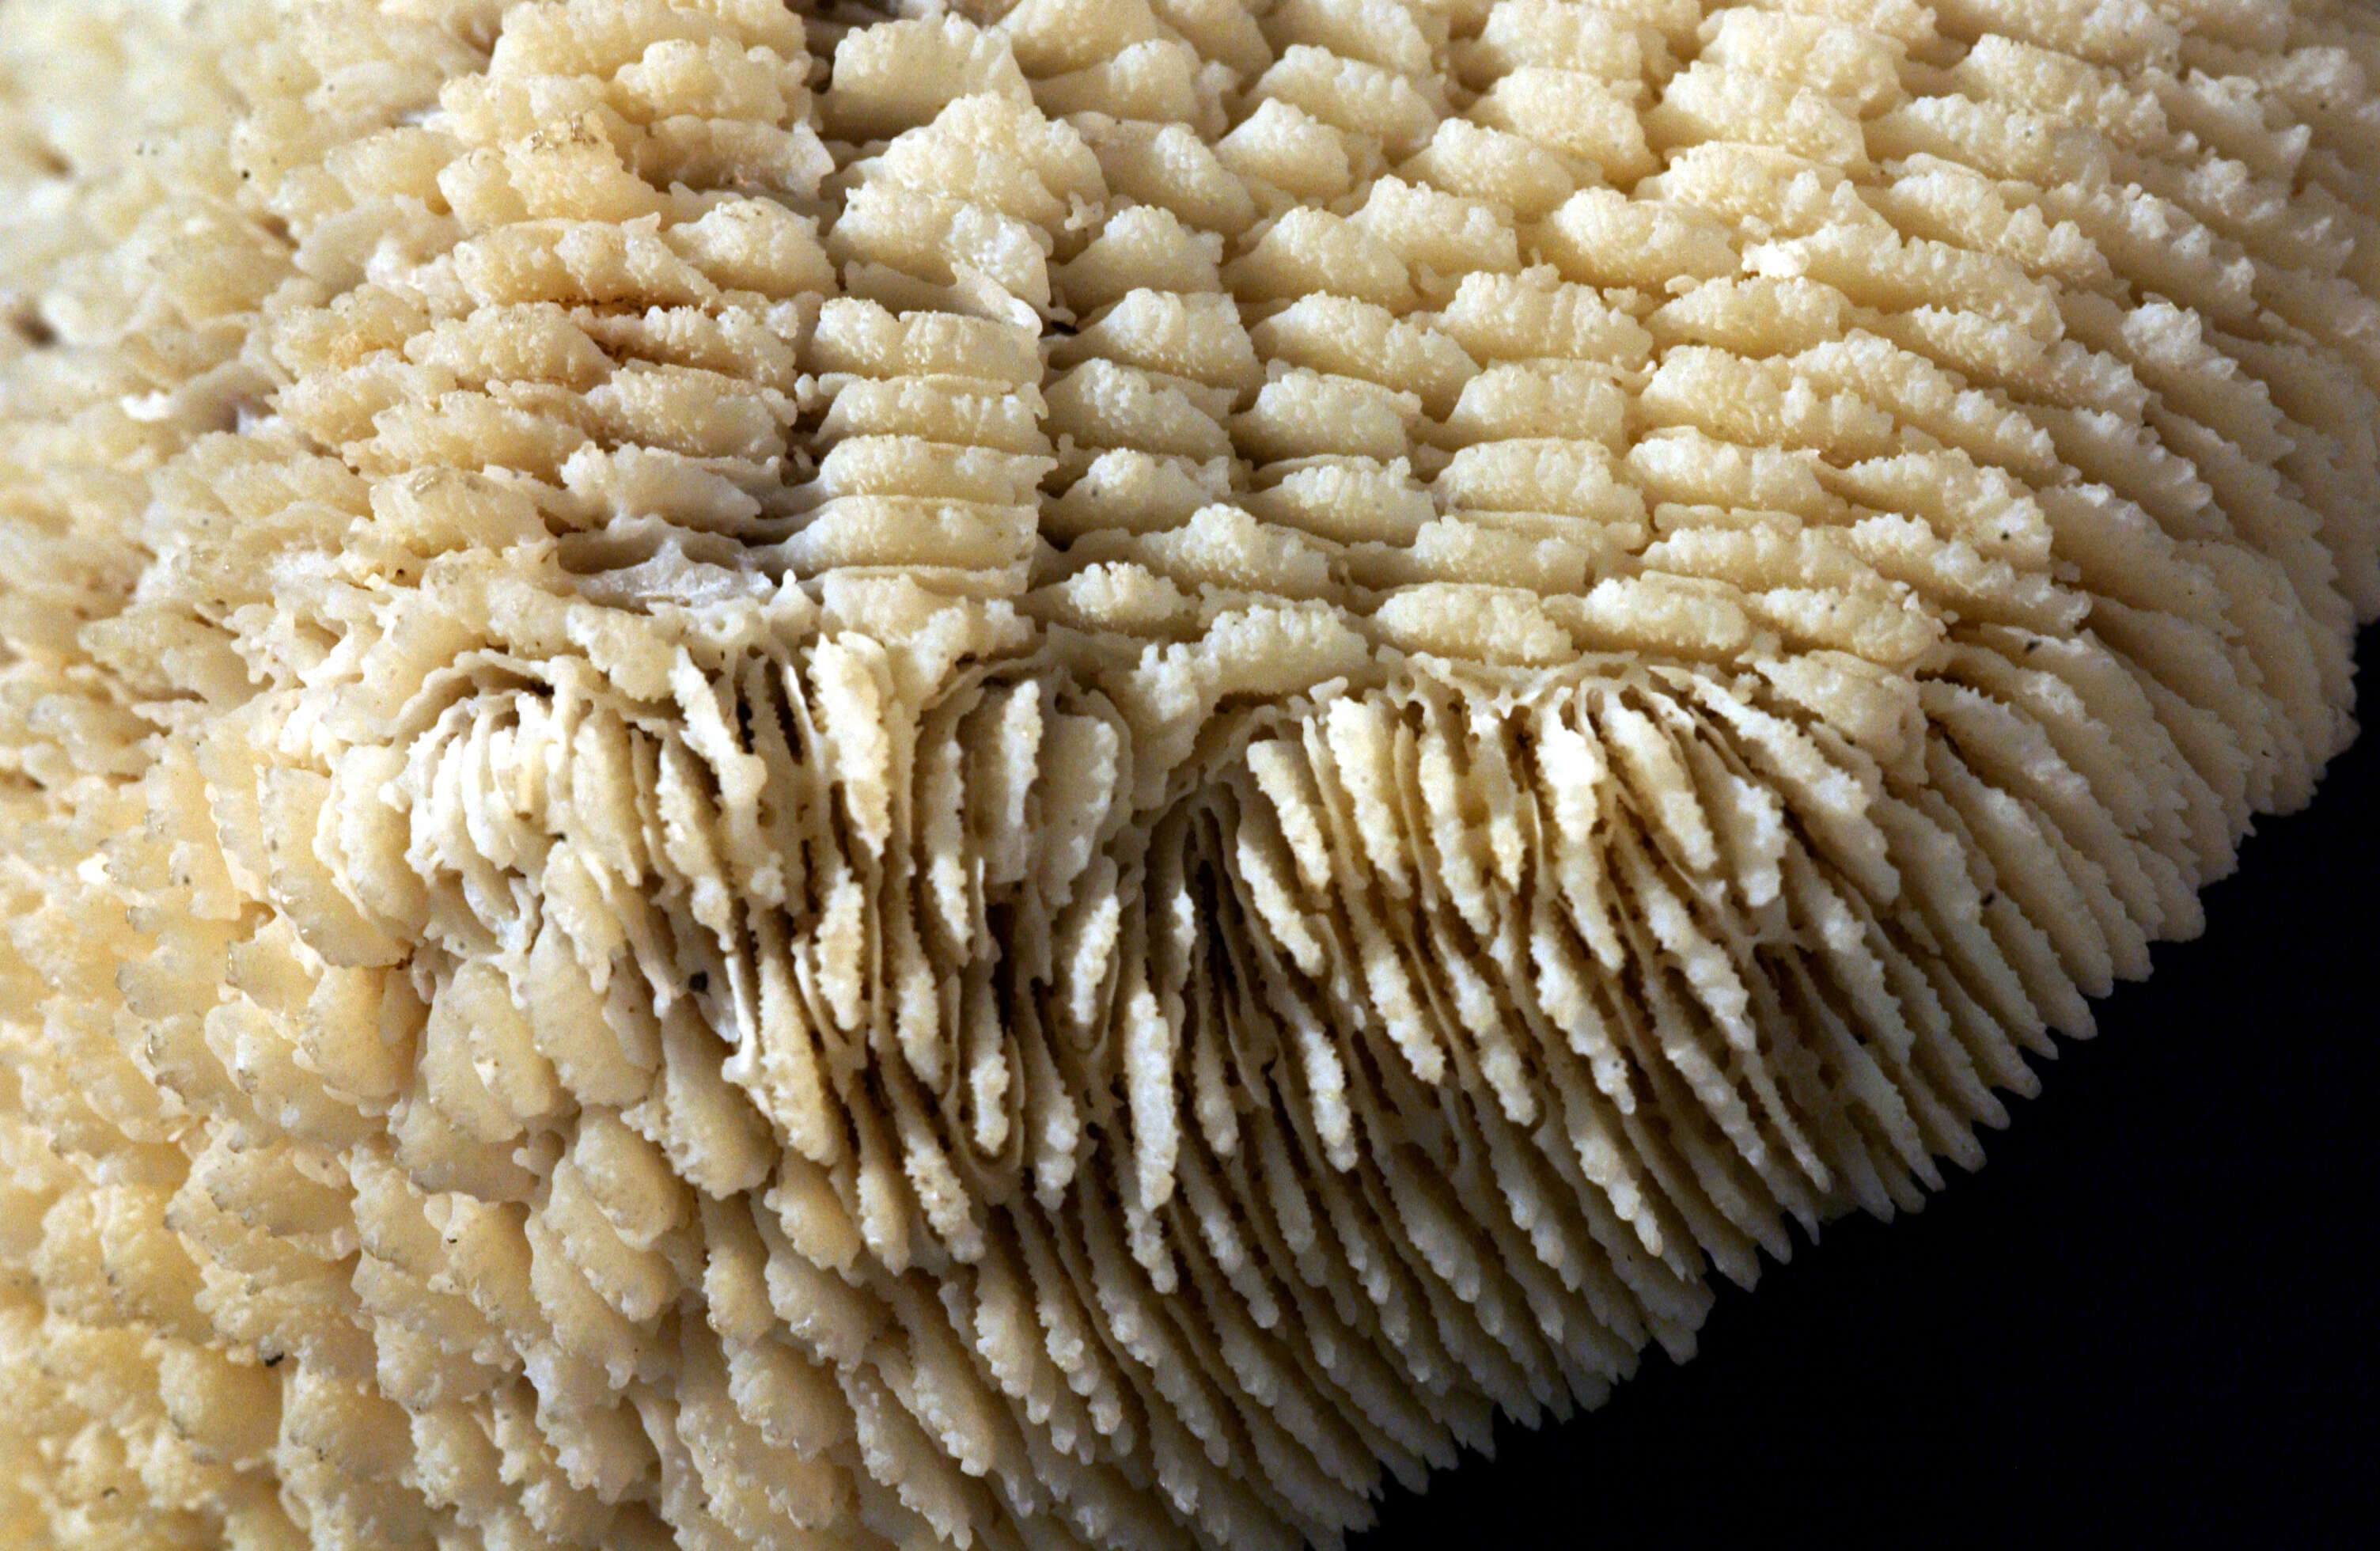 Image of Slipper coral